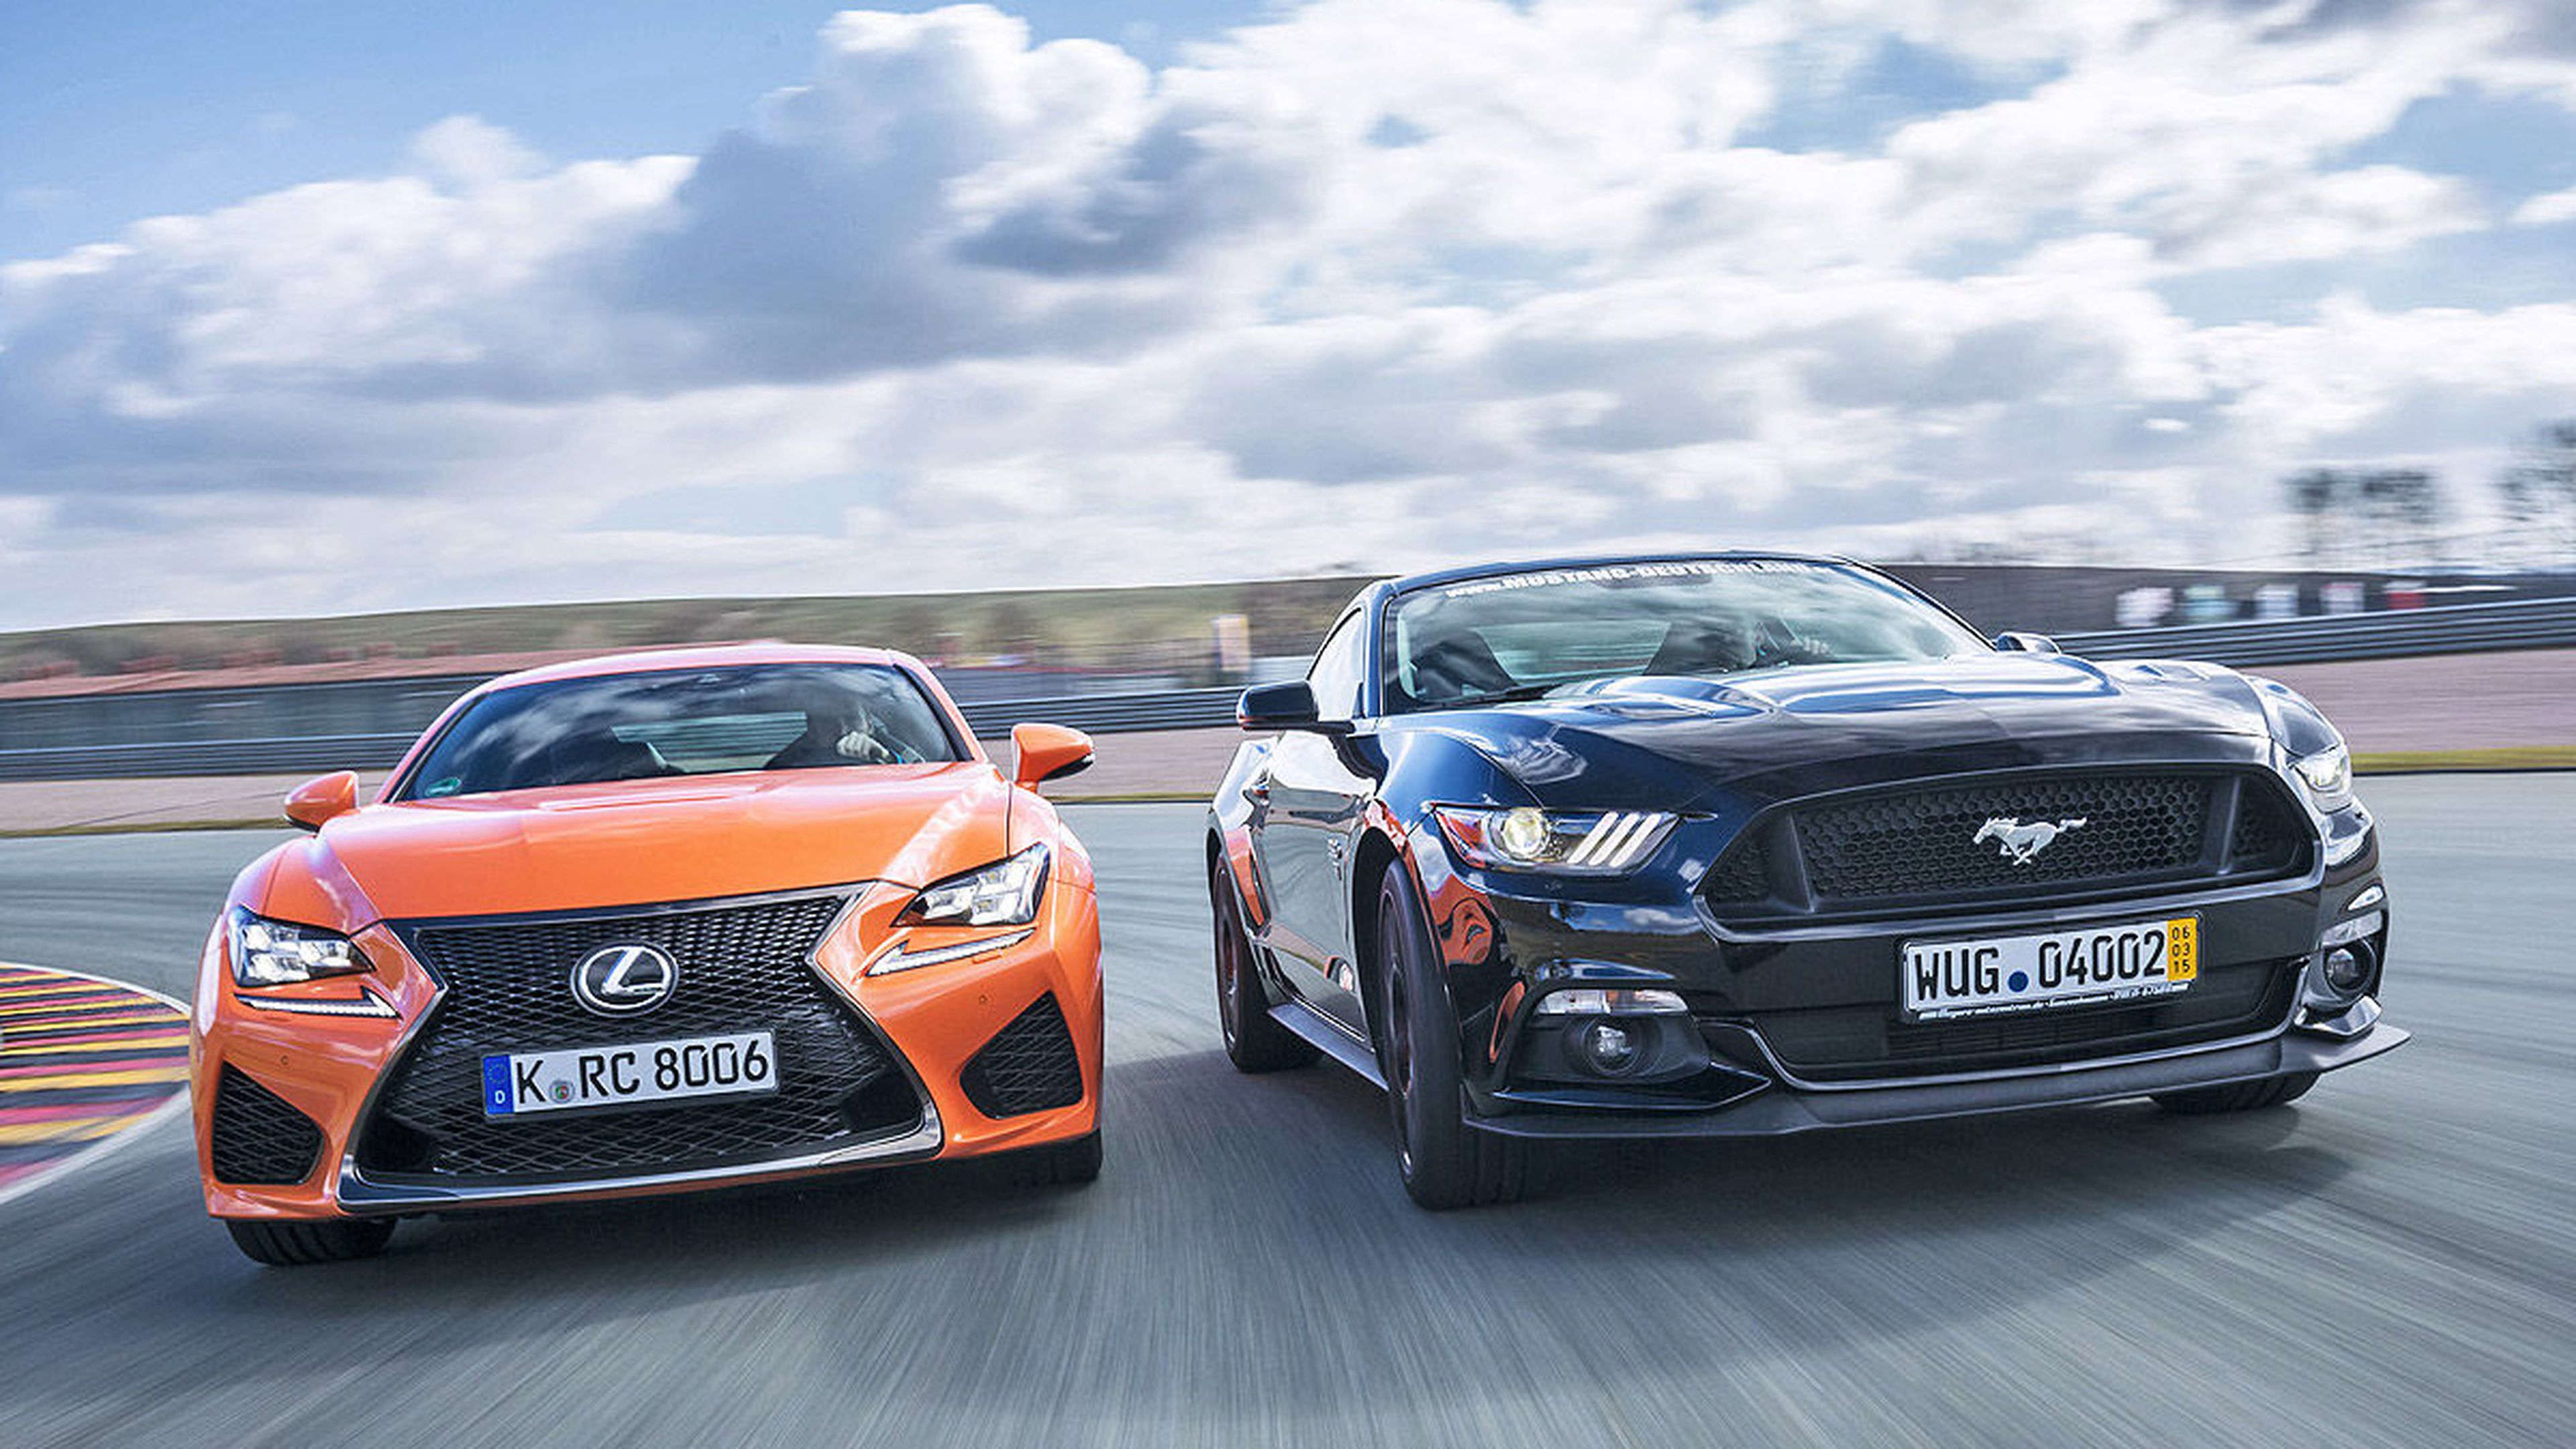 Duelo explosivo: Ford Mustang GT contra Lexus RC F